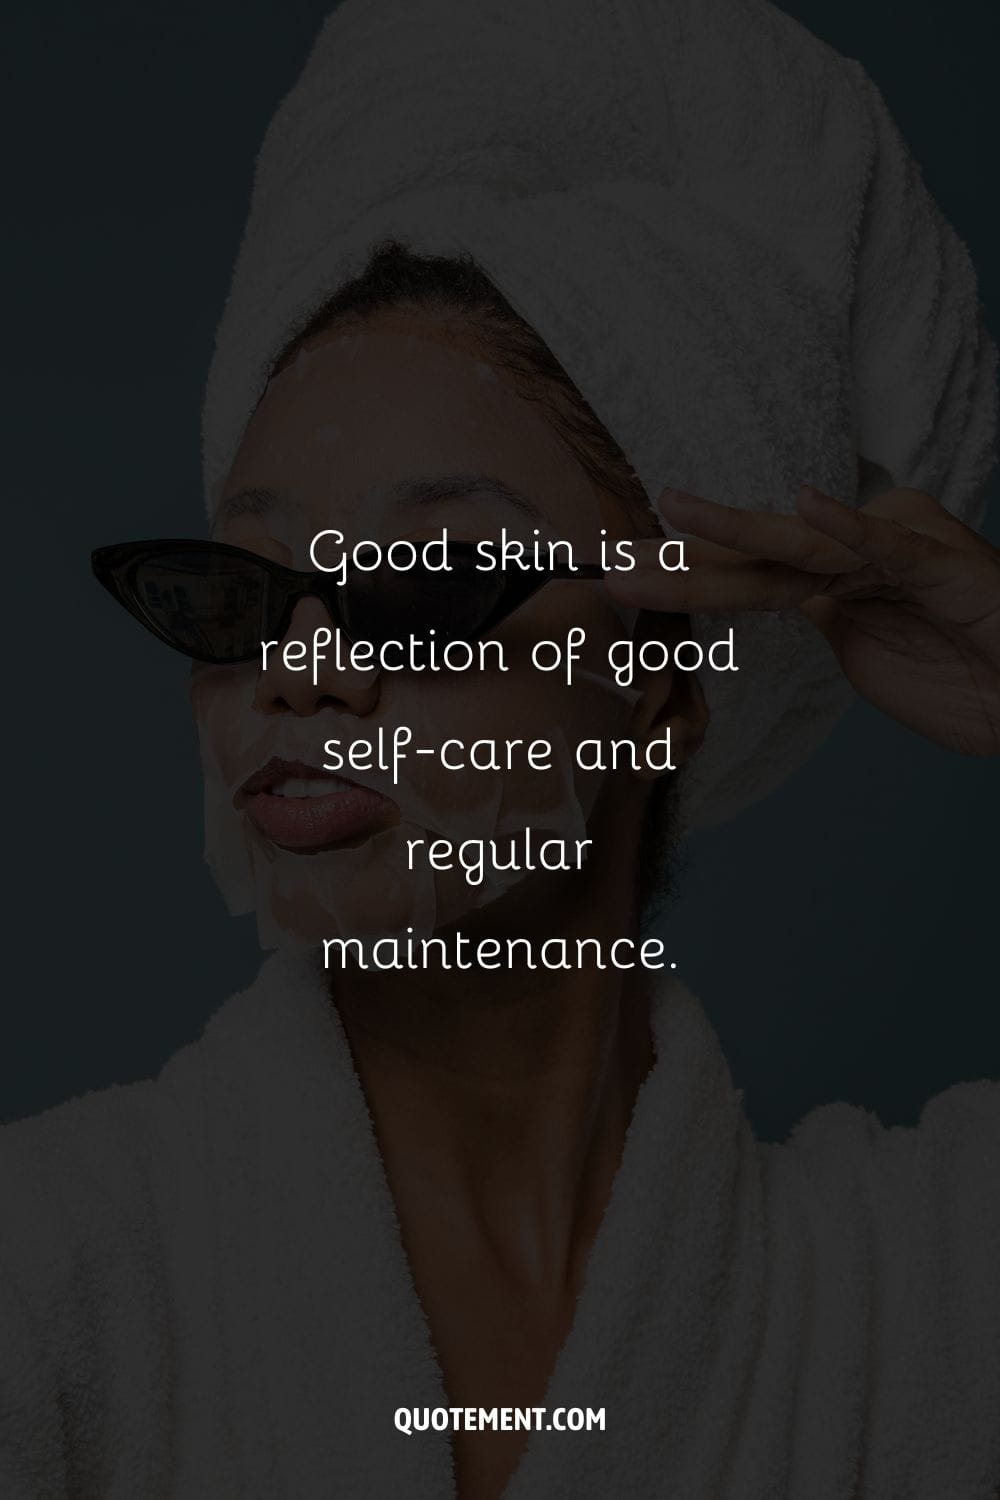 Good skin is a reflection of good self-care and regular maintenance.